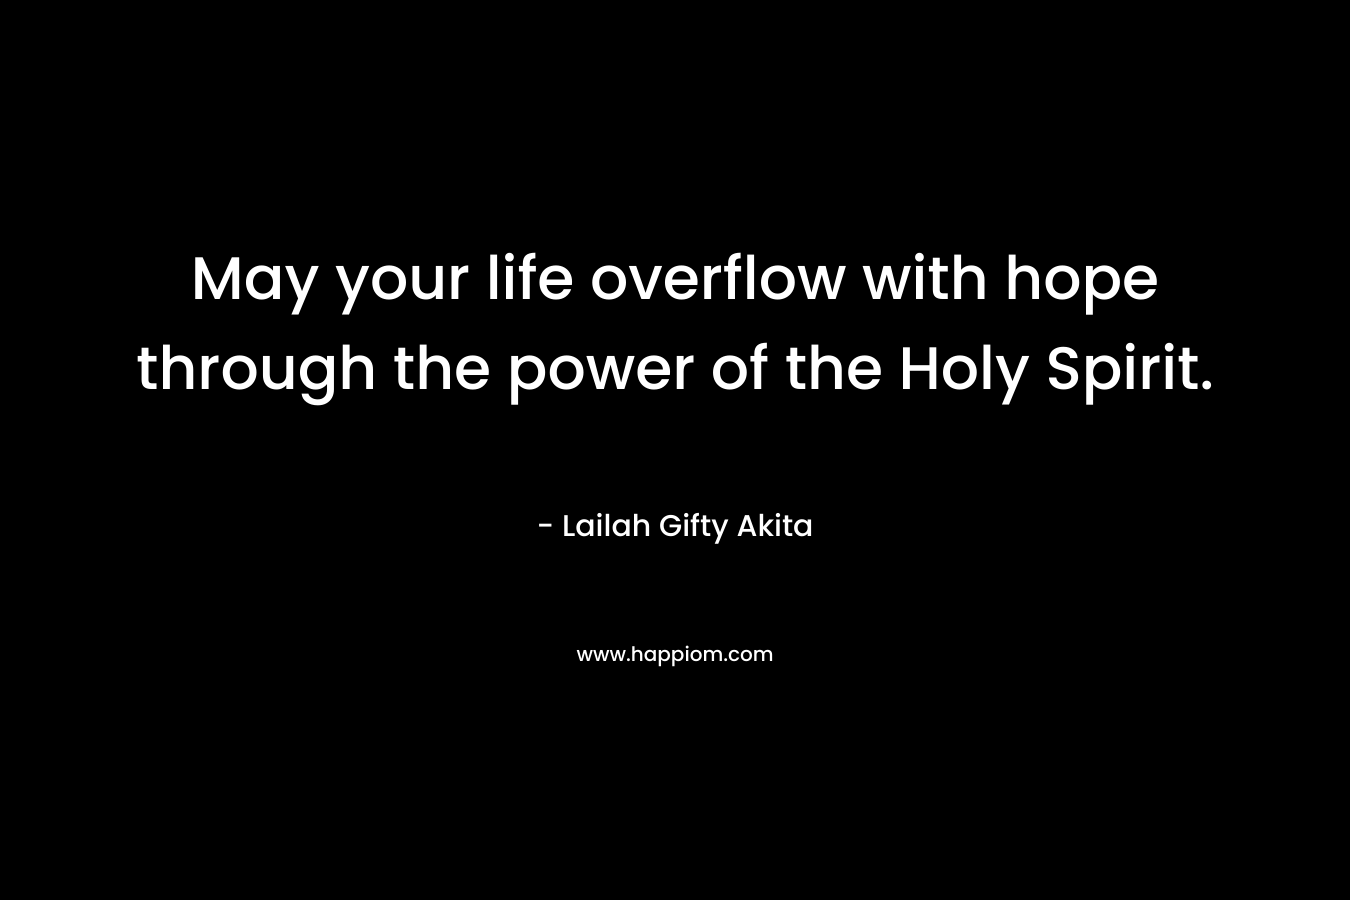 May your life overflow with hope through the power of the Holy Spirit. – Lailah Gifty Akita